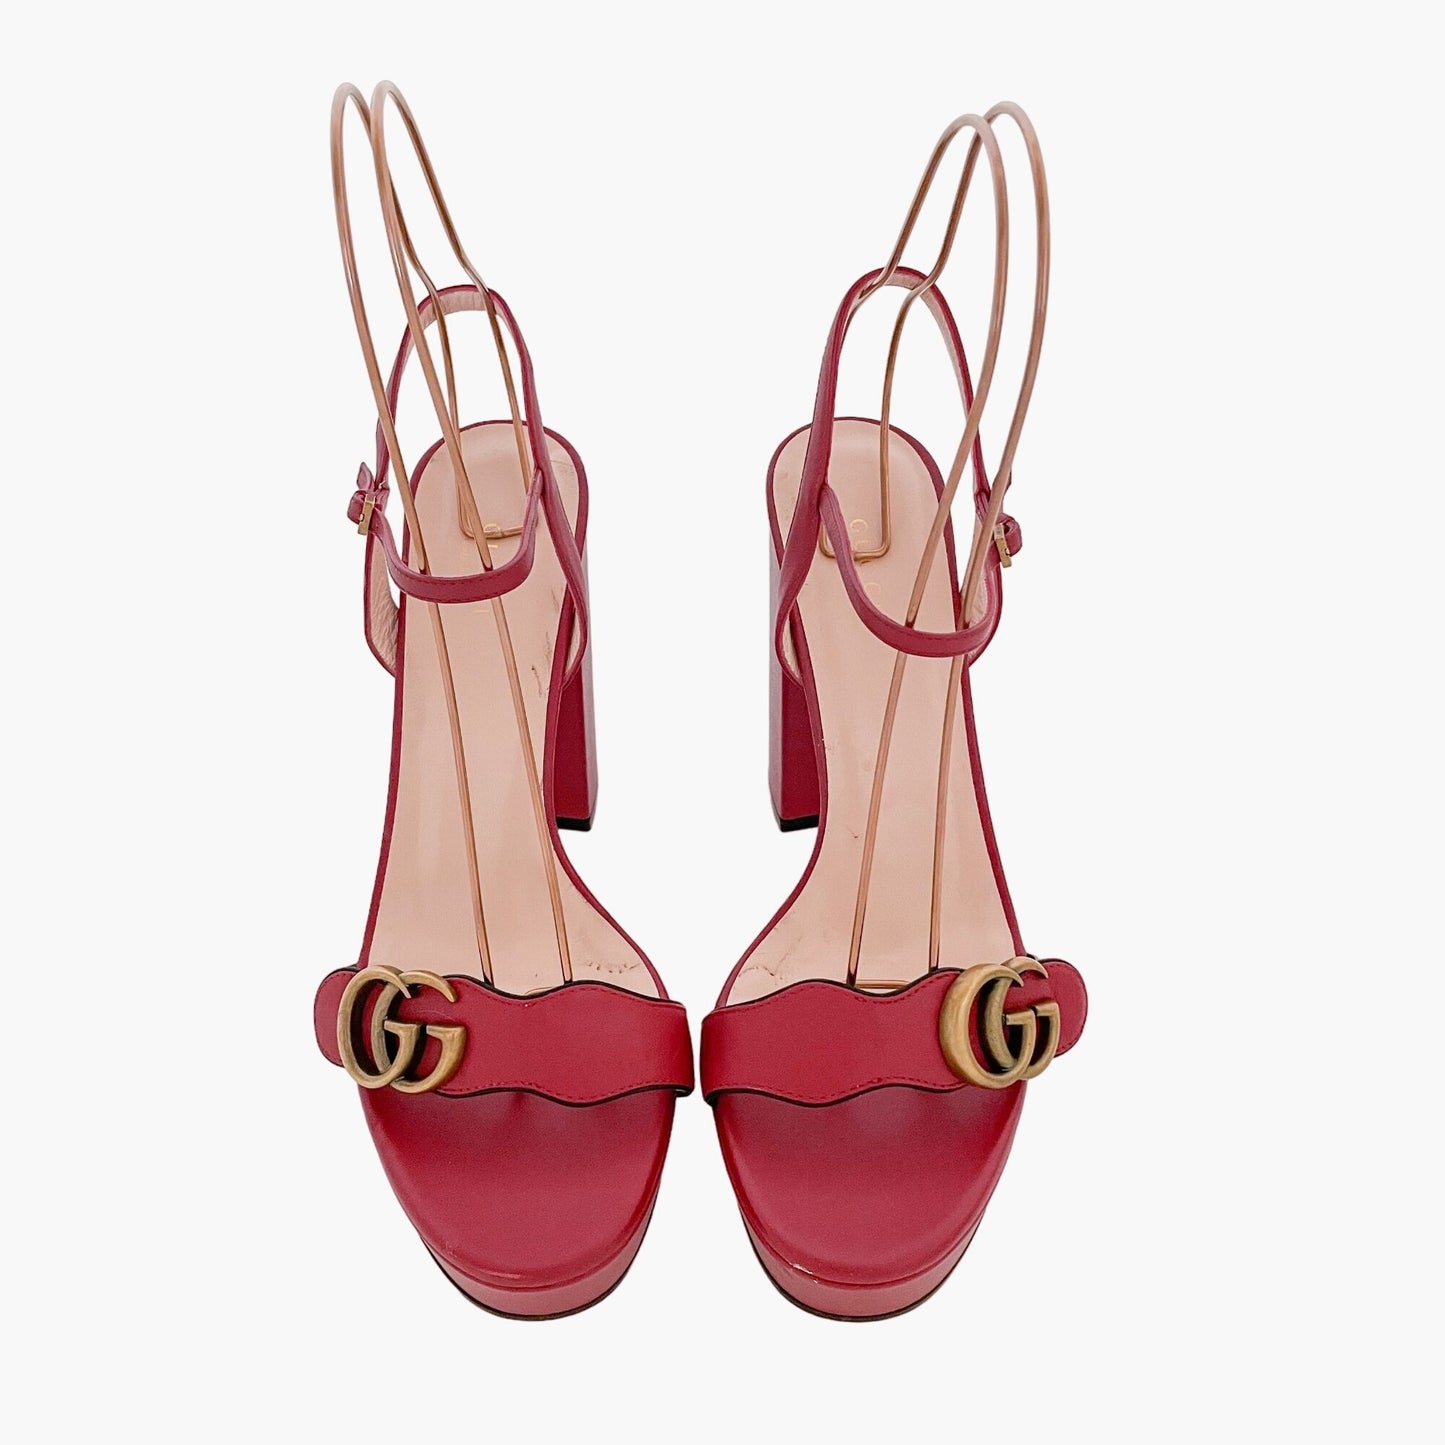 Gucci GG Marmont Platform Sandals in Red Leather Size 40.5